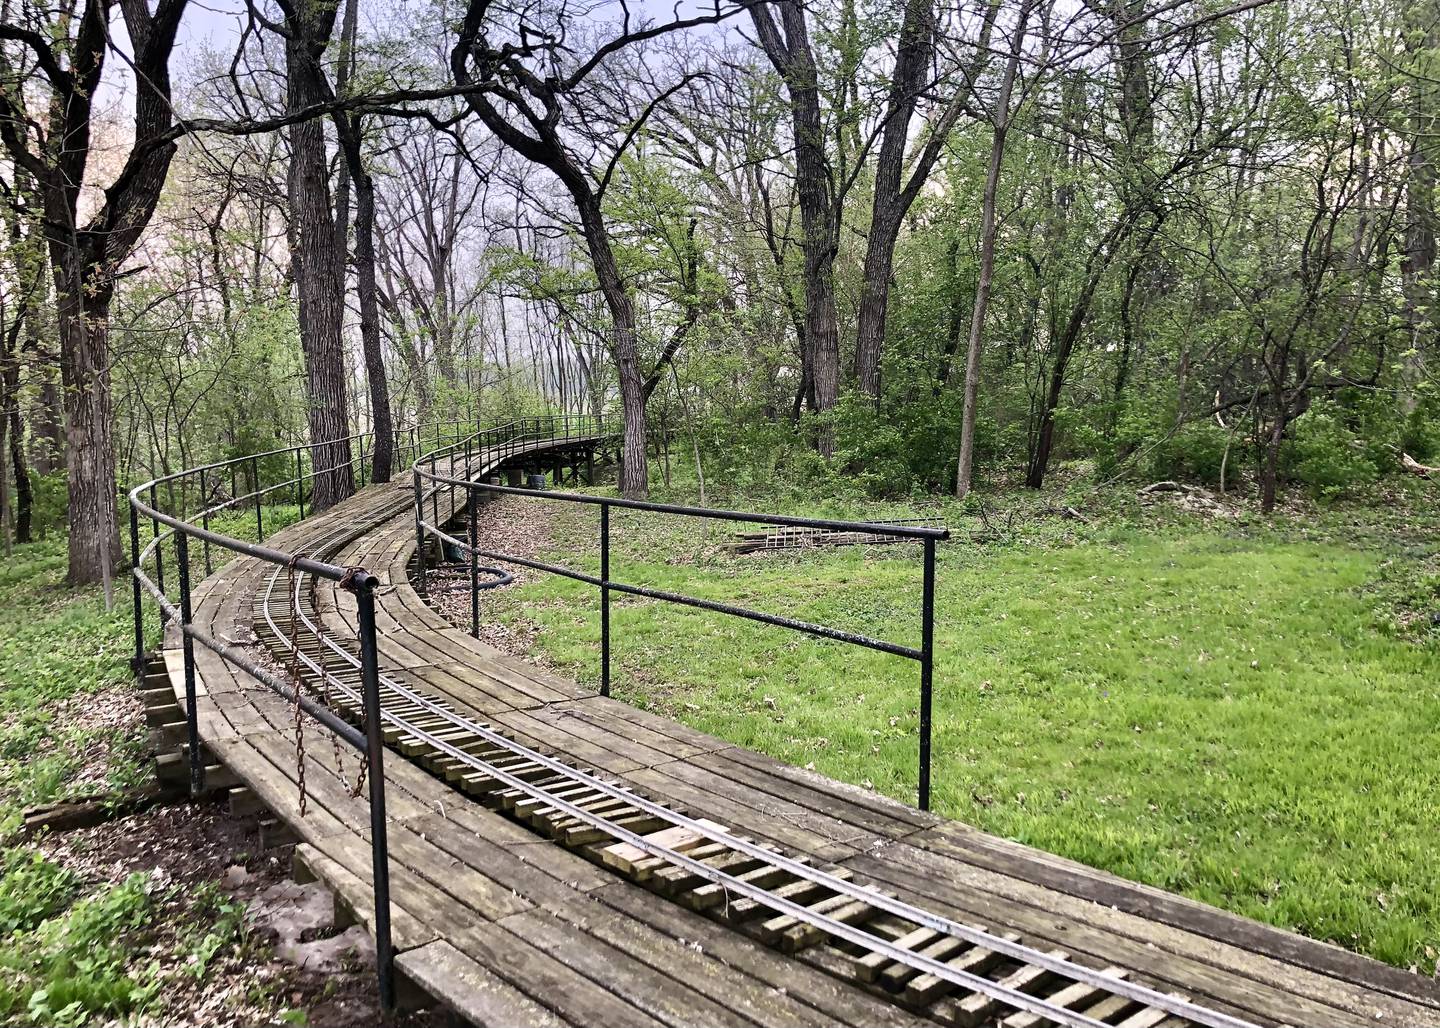 The Pairie State Railroad 7.5 gauge track runs nearly a mile around Plowman's Park.